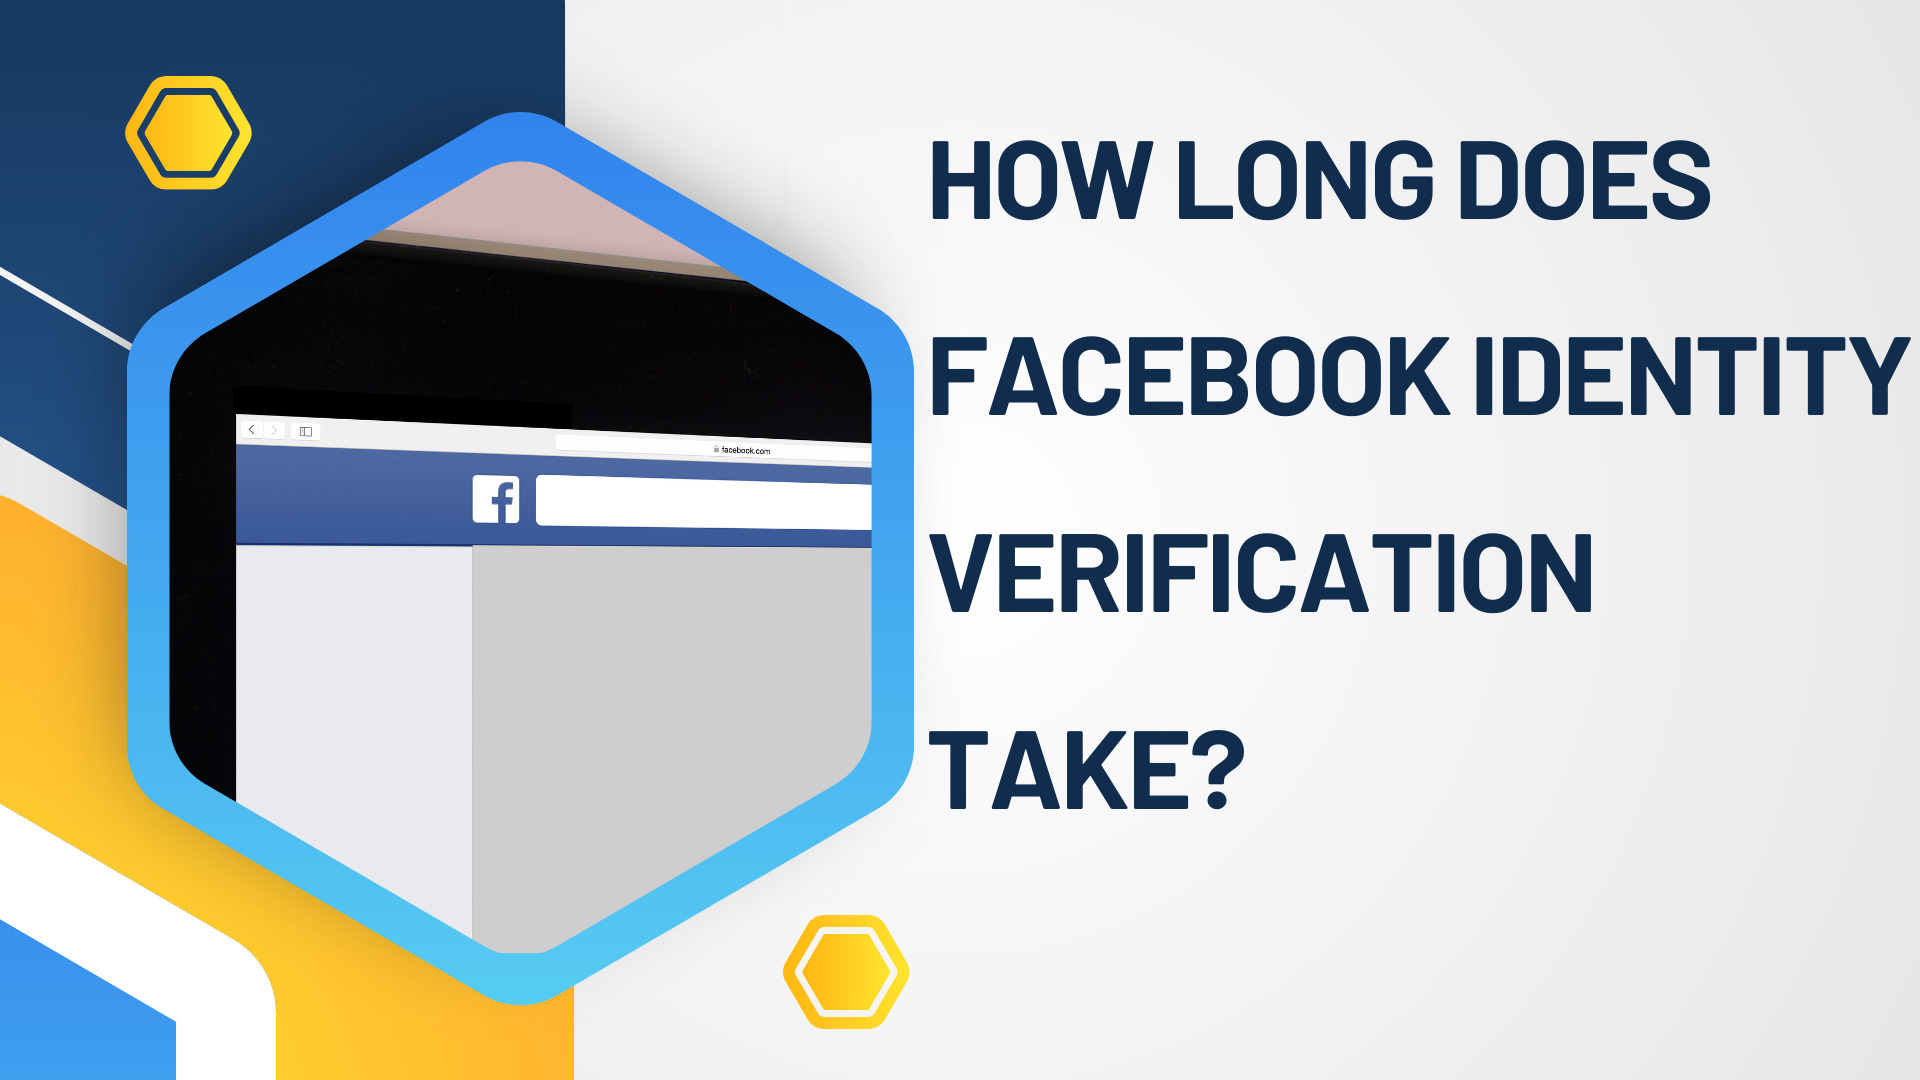 How long does Facebook identity verification take?